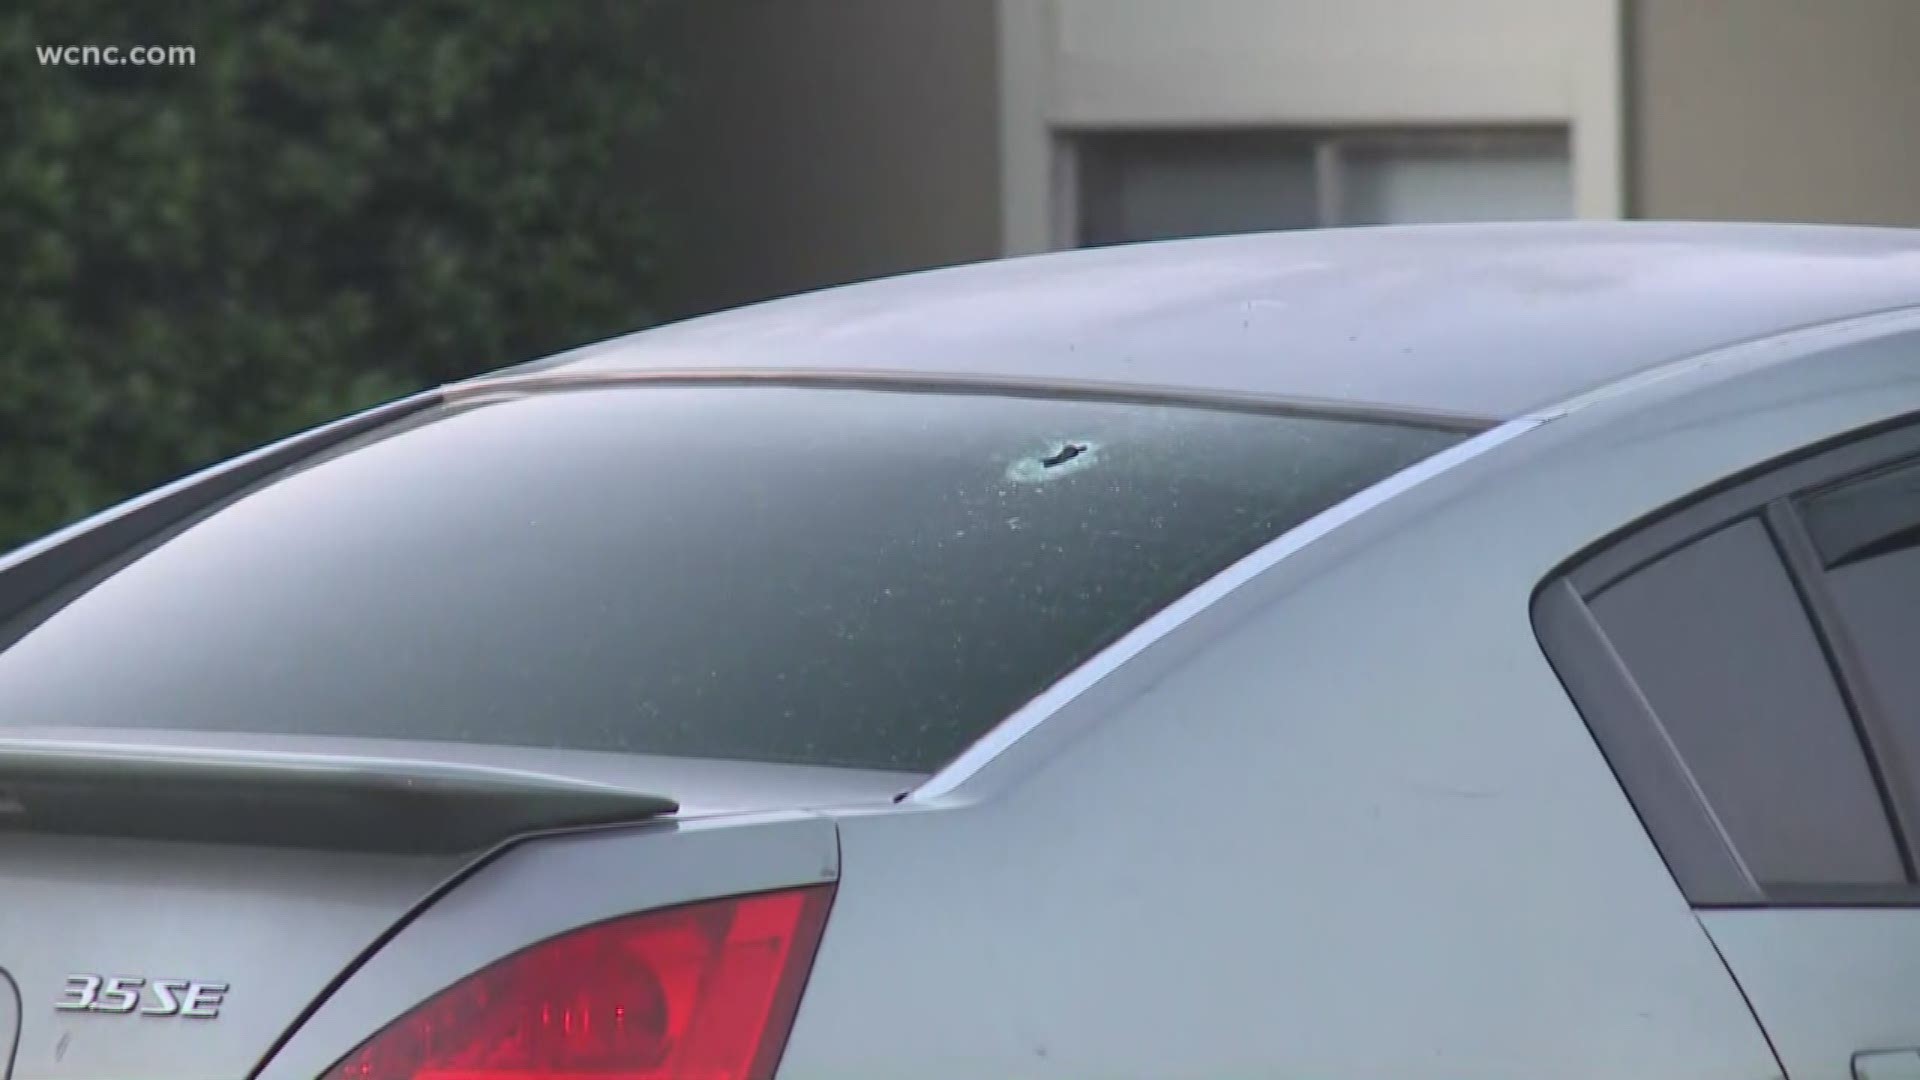 CMPD is investigating a shootout at a northeast Charlotte apartment complex.